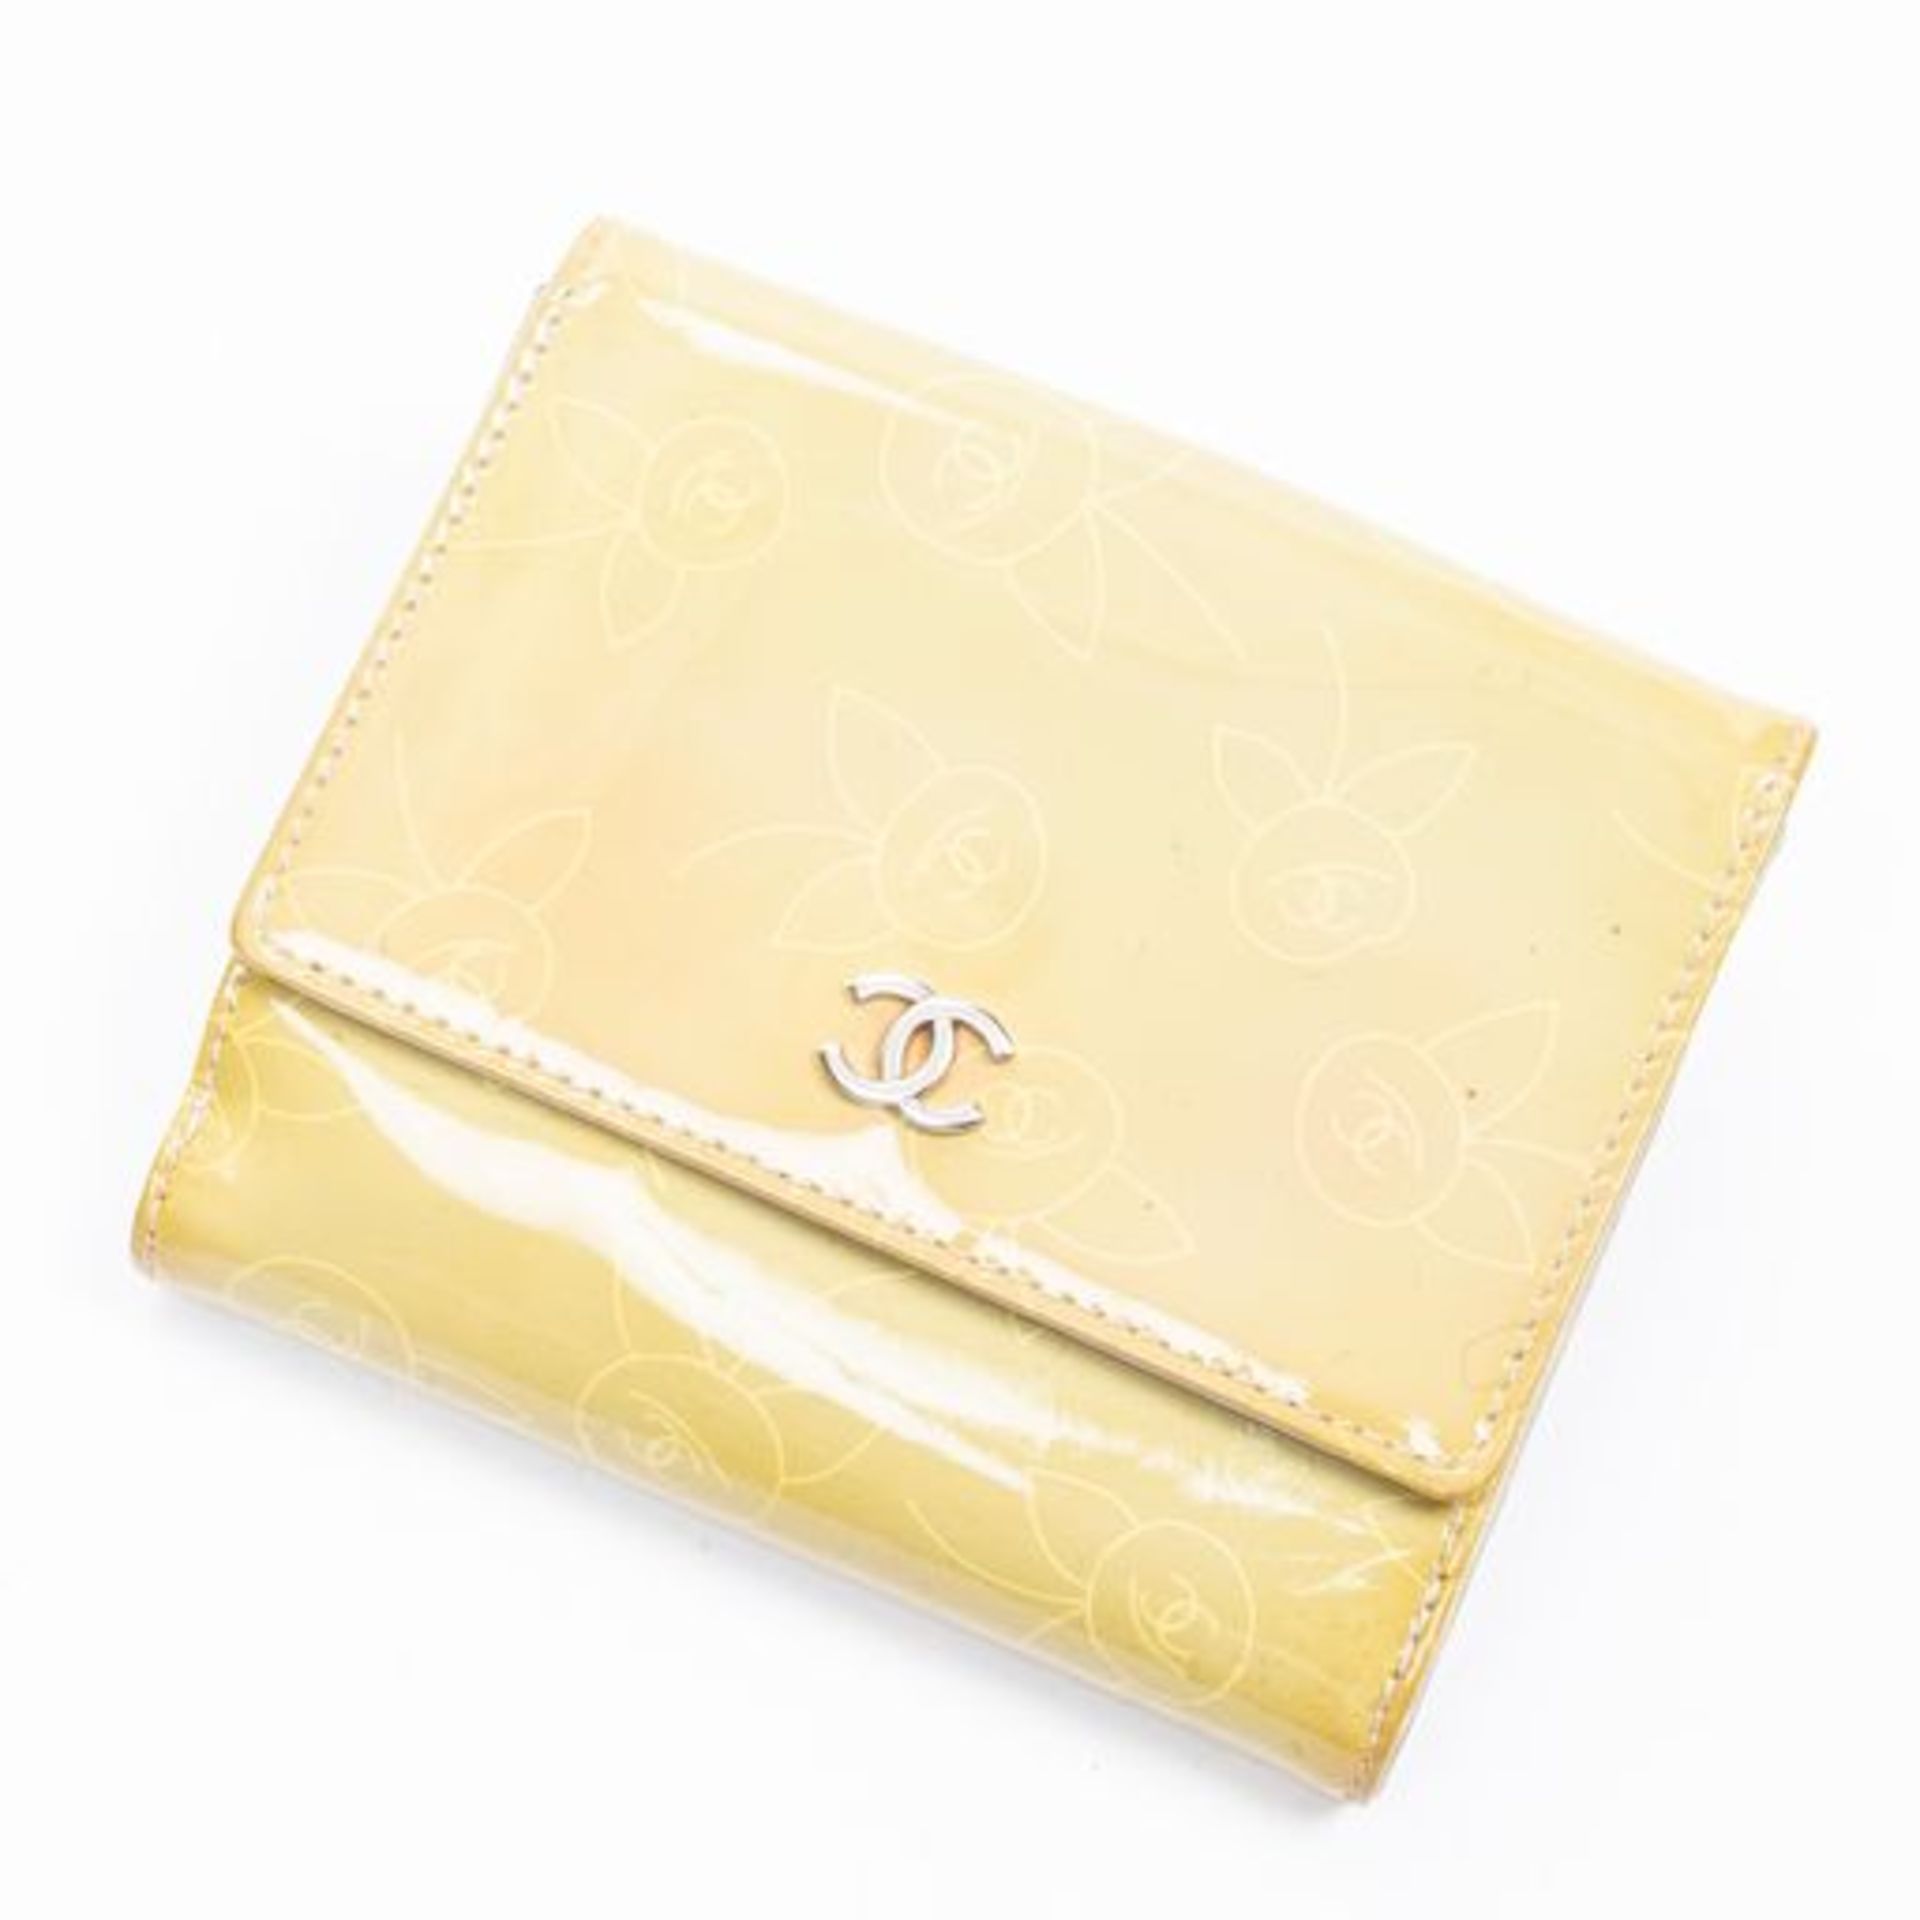 RRP £630 Chanel Cc Compact Bifold Wallet Olive Green - AAR0365 - Grade AB - (Bags Are Not On Site,